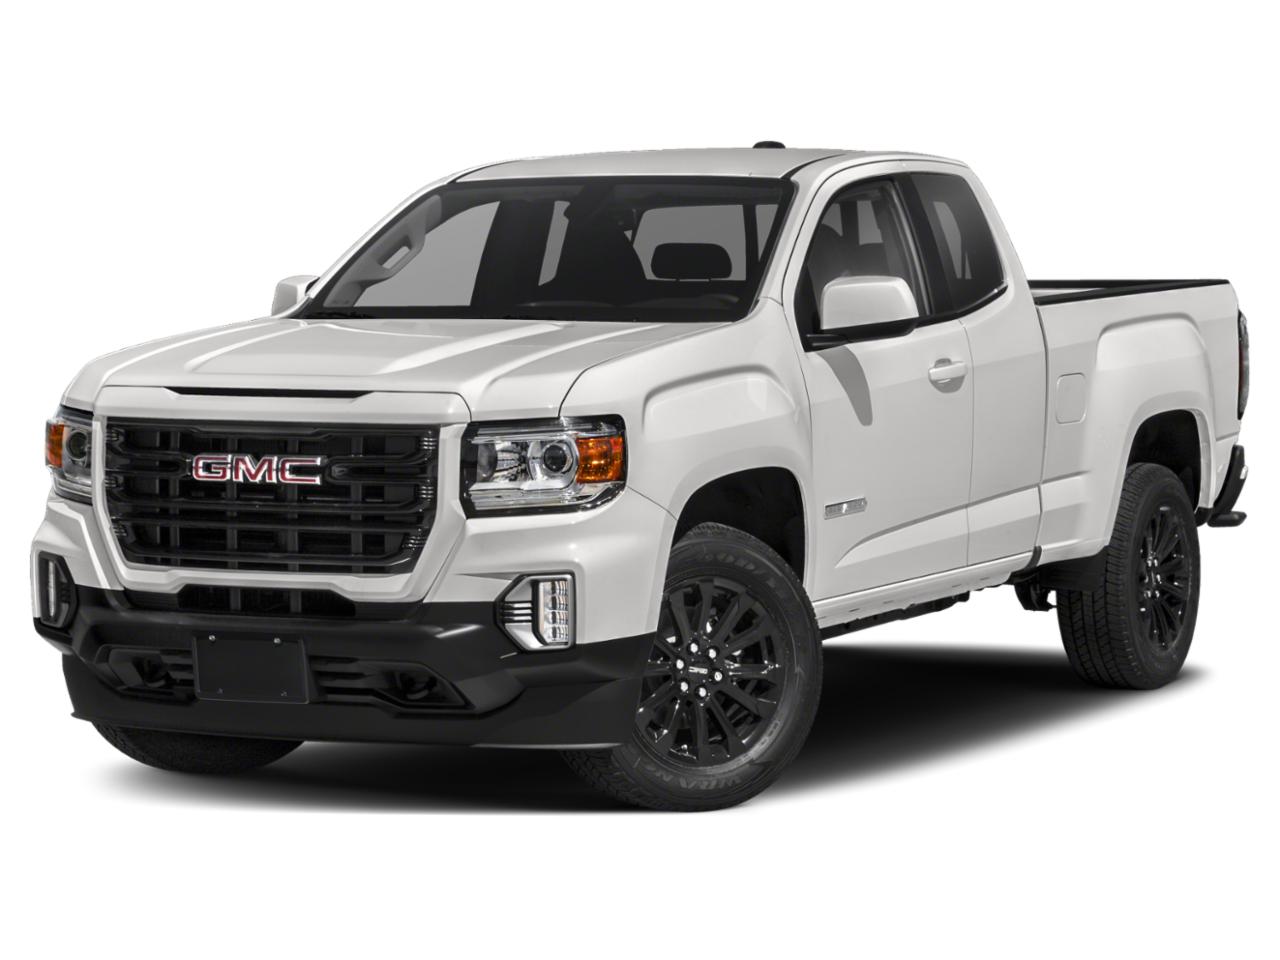 New GMC Canyon Vehicles for Sale in SOMERSET, PA Woy Brothers Inc.